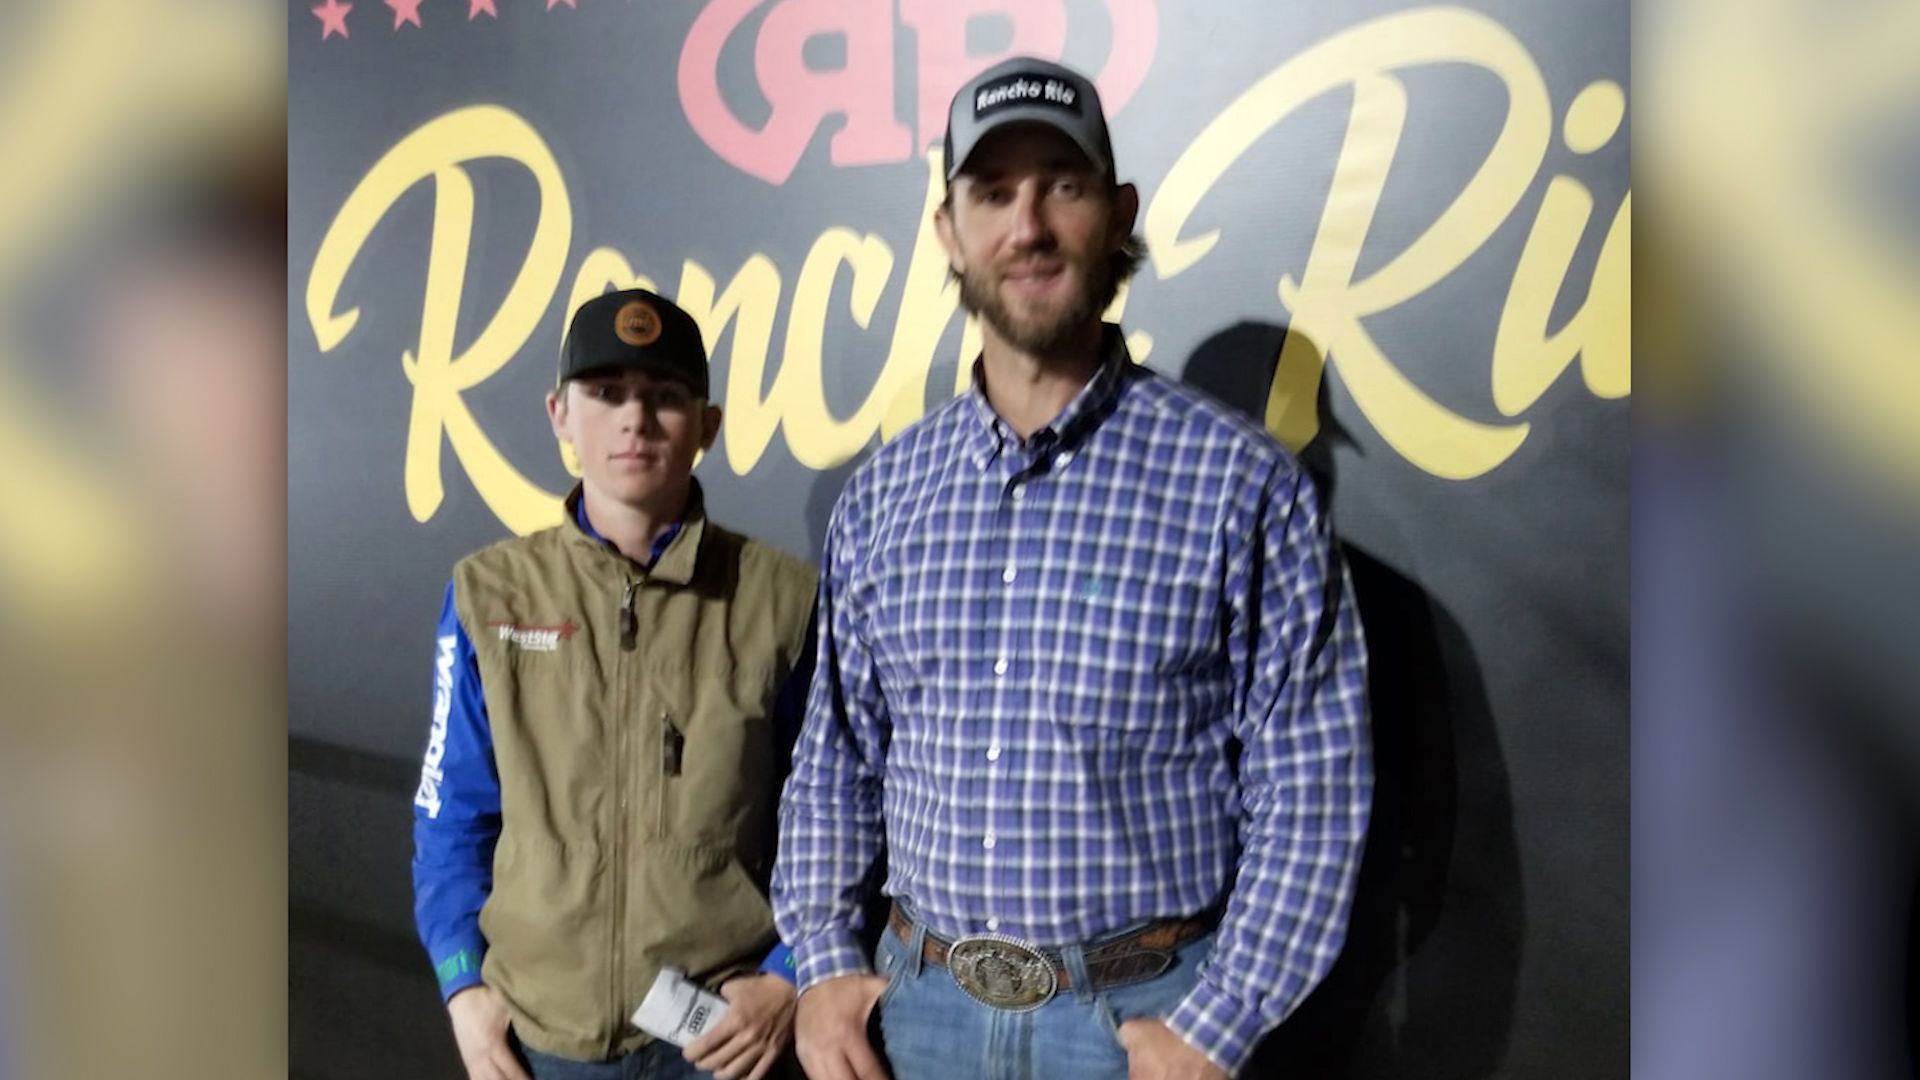 Star MLB pitcher Madison Bumgarner heycaught using alias to compete in  rodeo